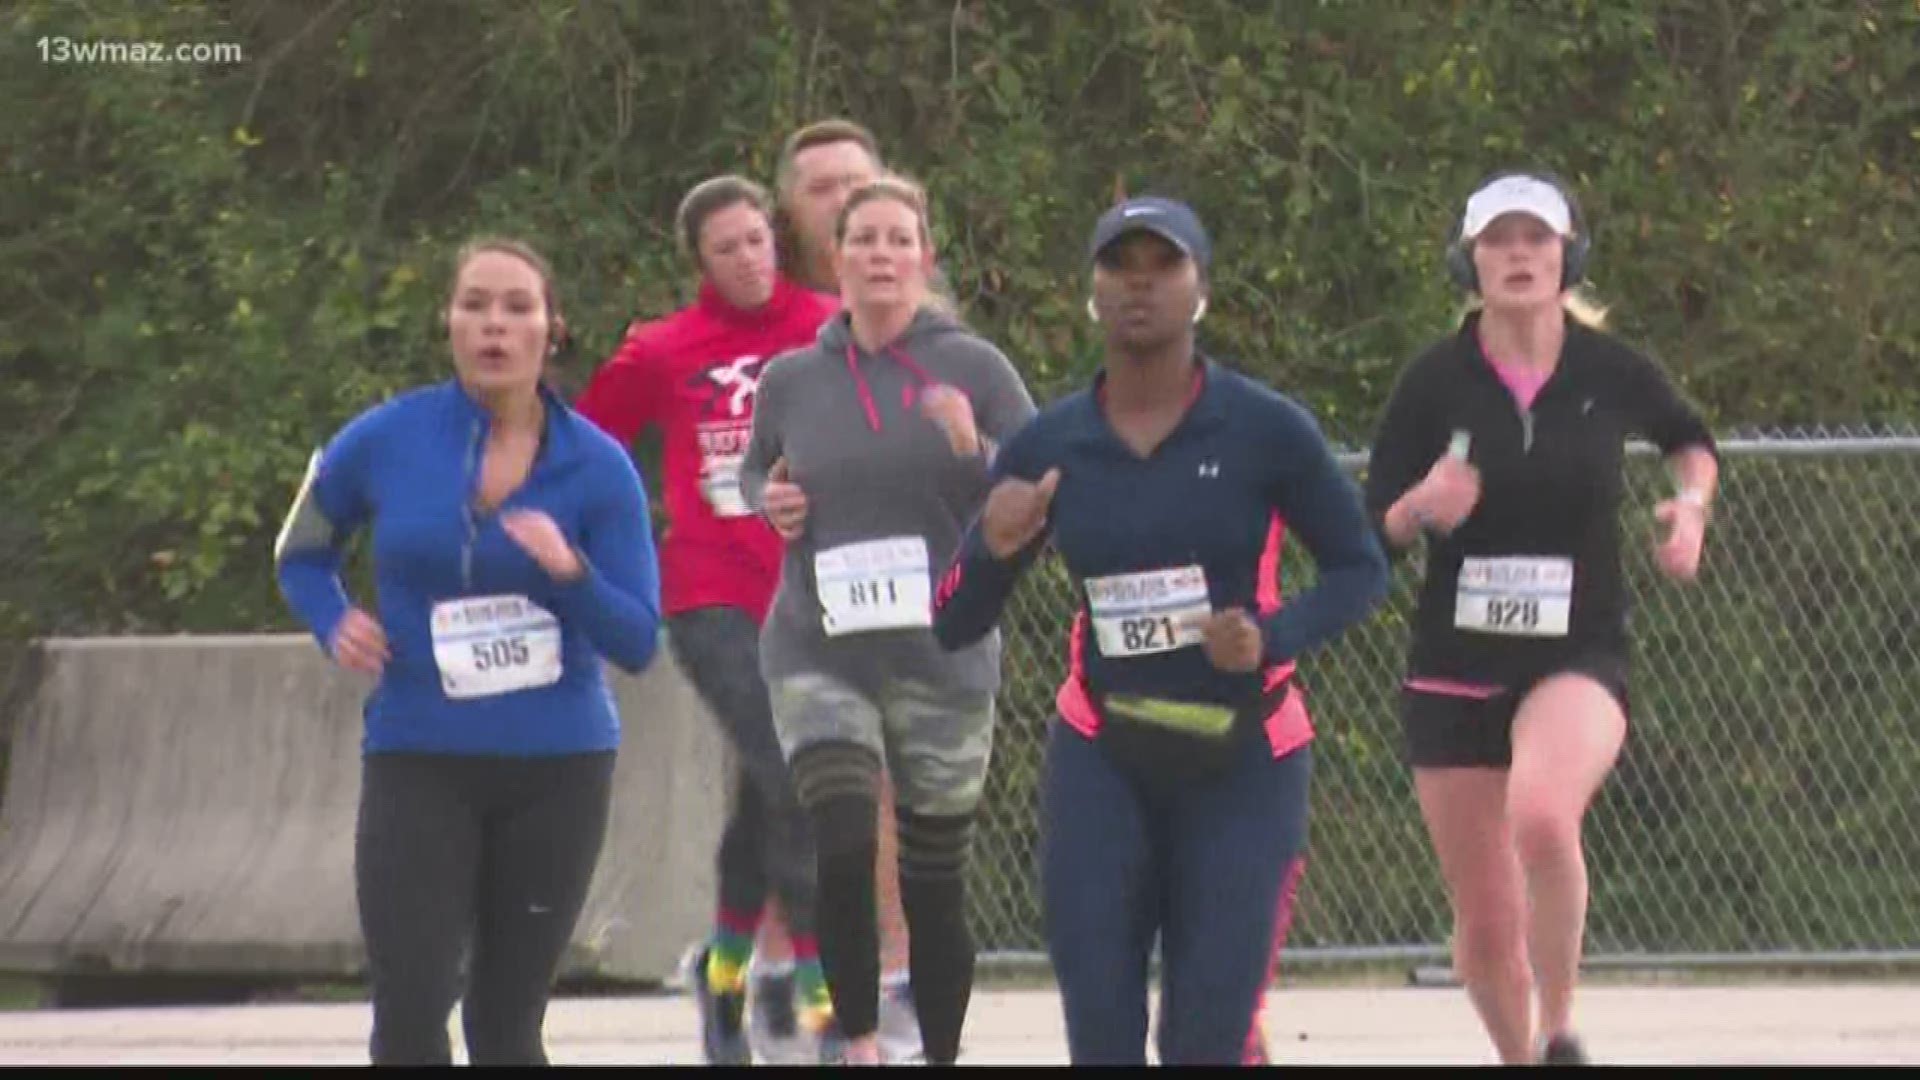 The Museum of Aviation Foundation held their 24th Marathon Saturday. Folks had a choice of four different races.